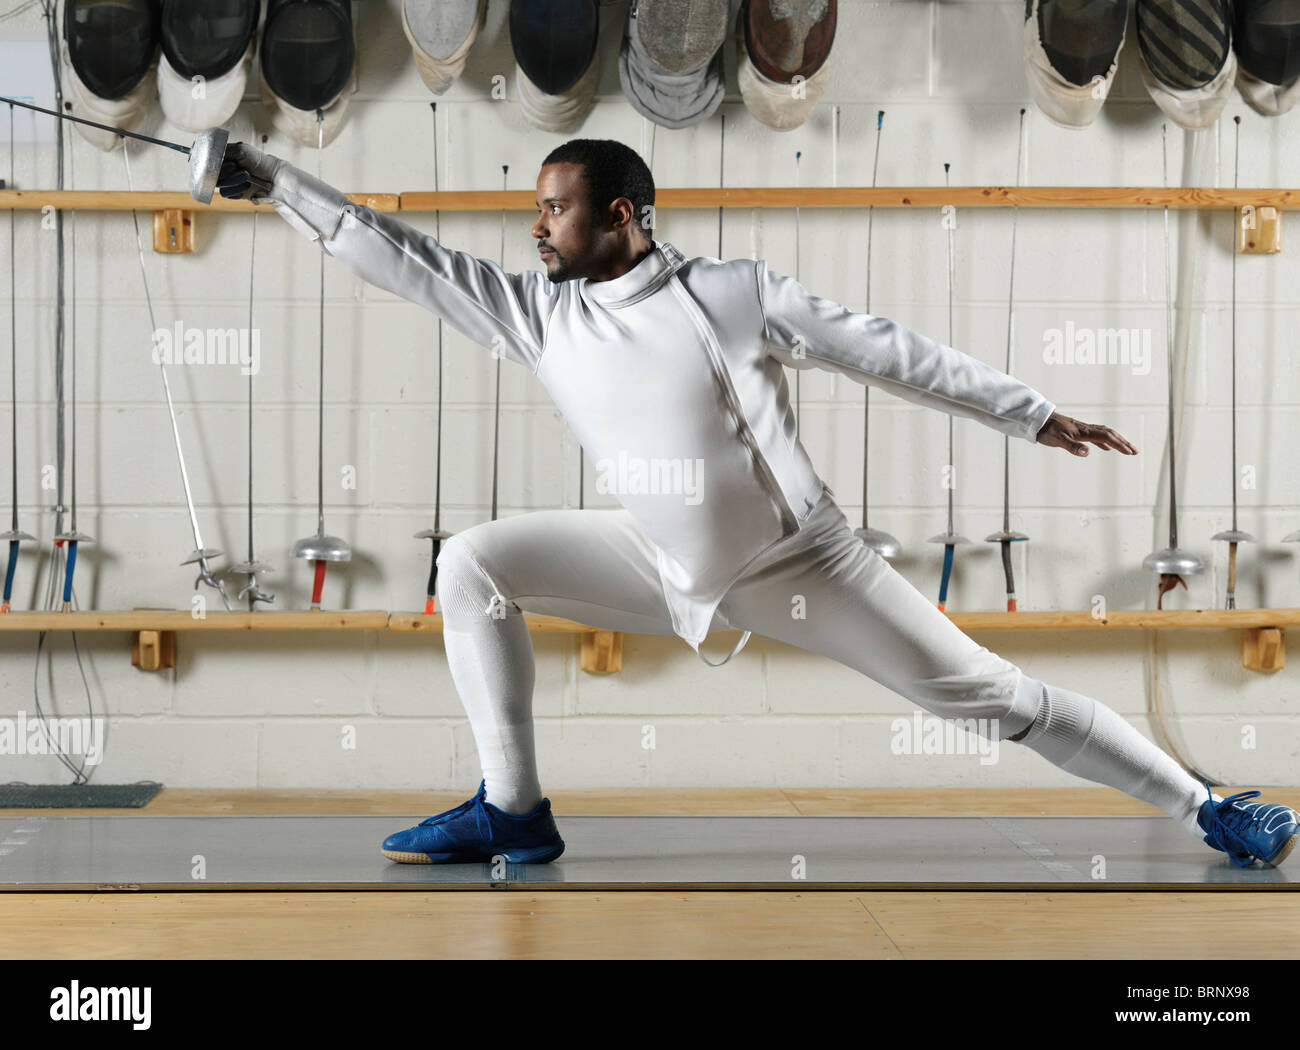 Fencer in white fencing uniform practicing in a gym Stock Photo - Alamy